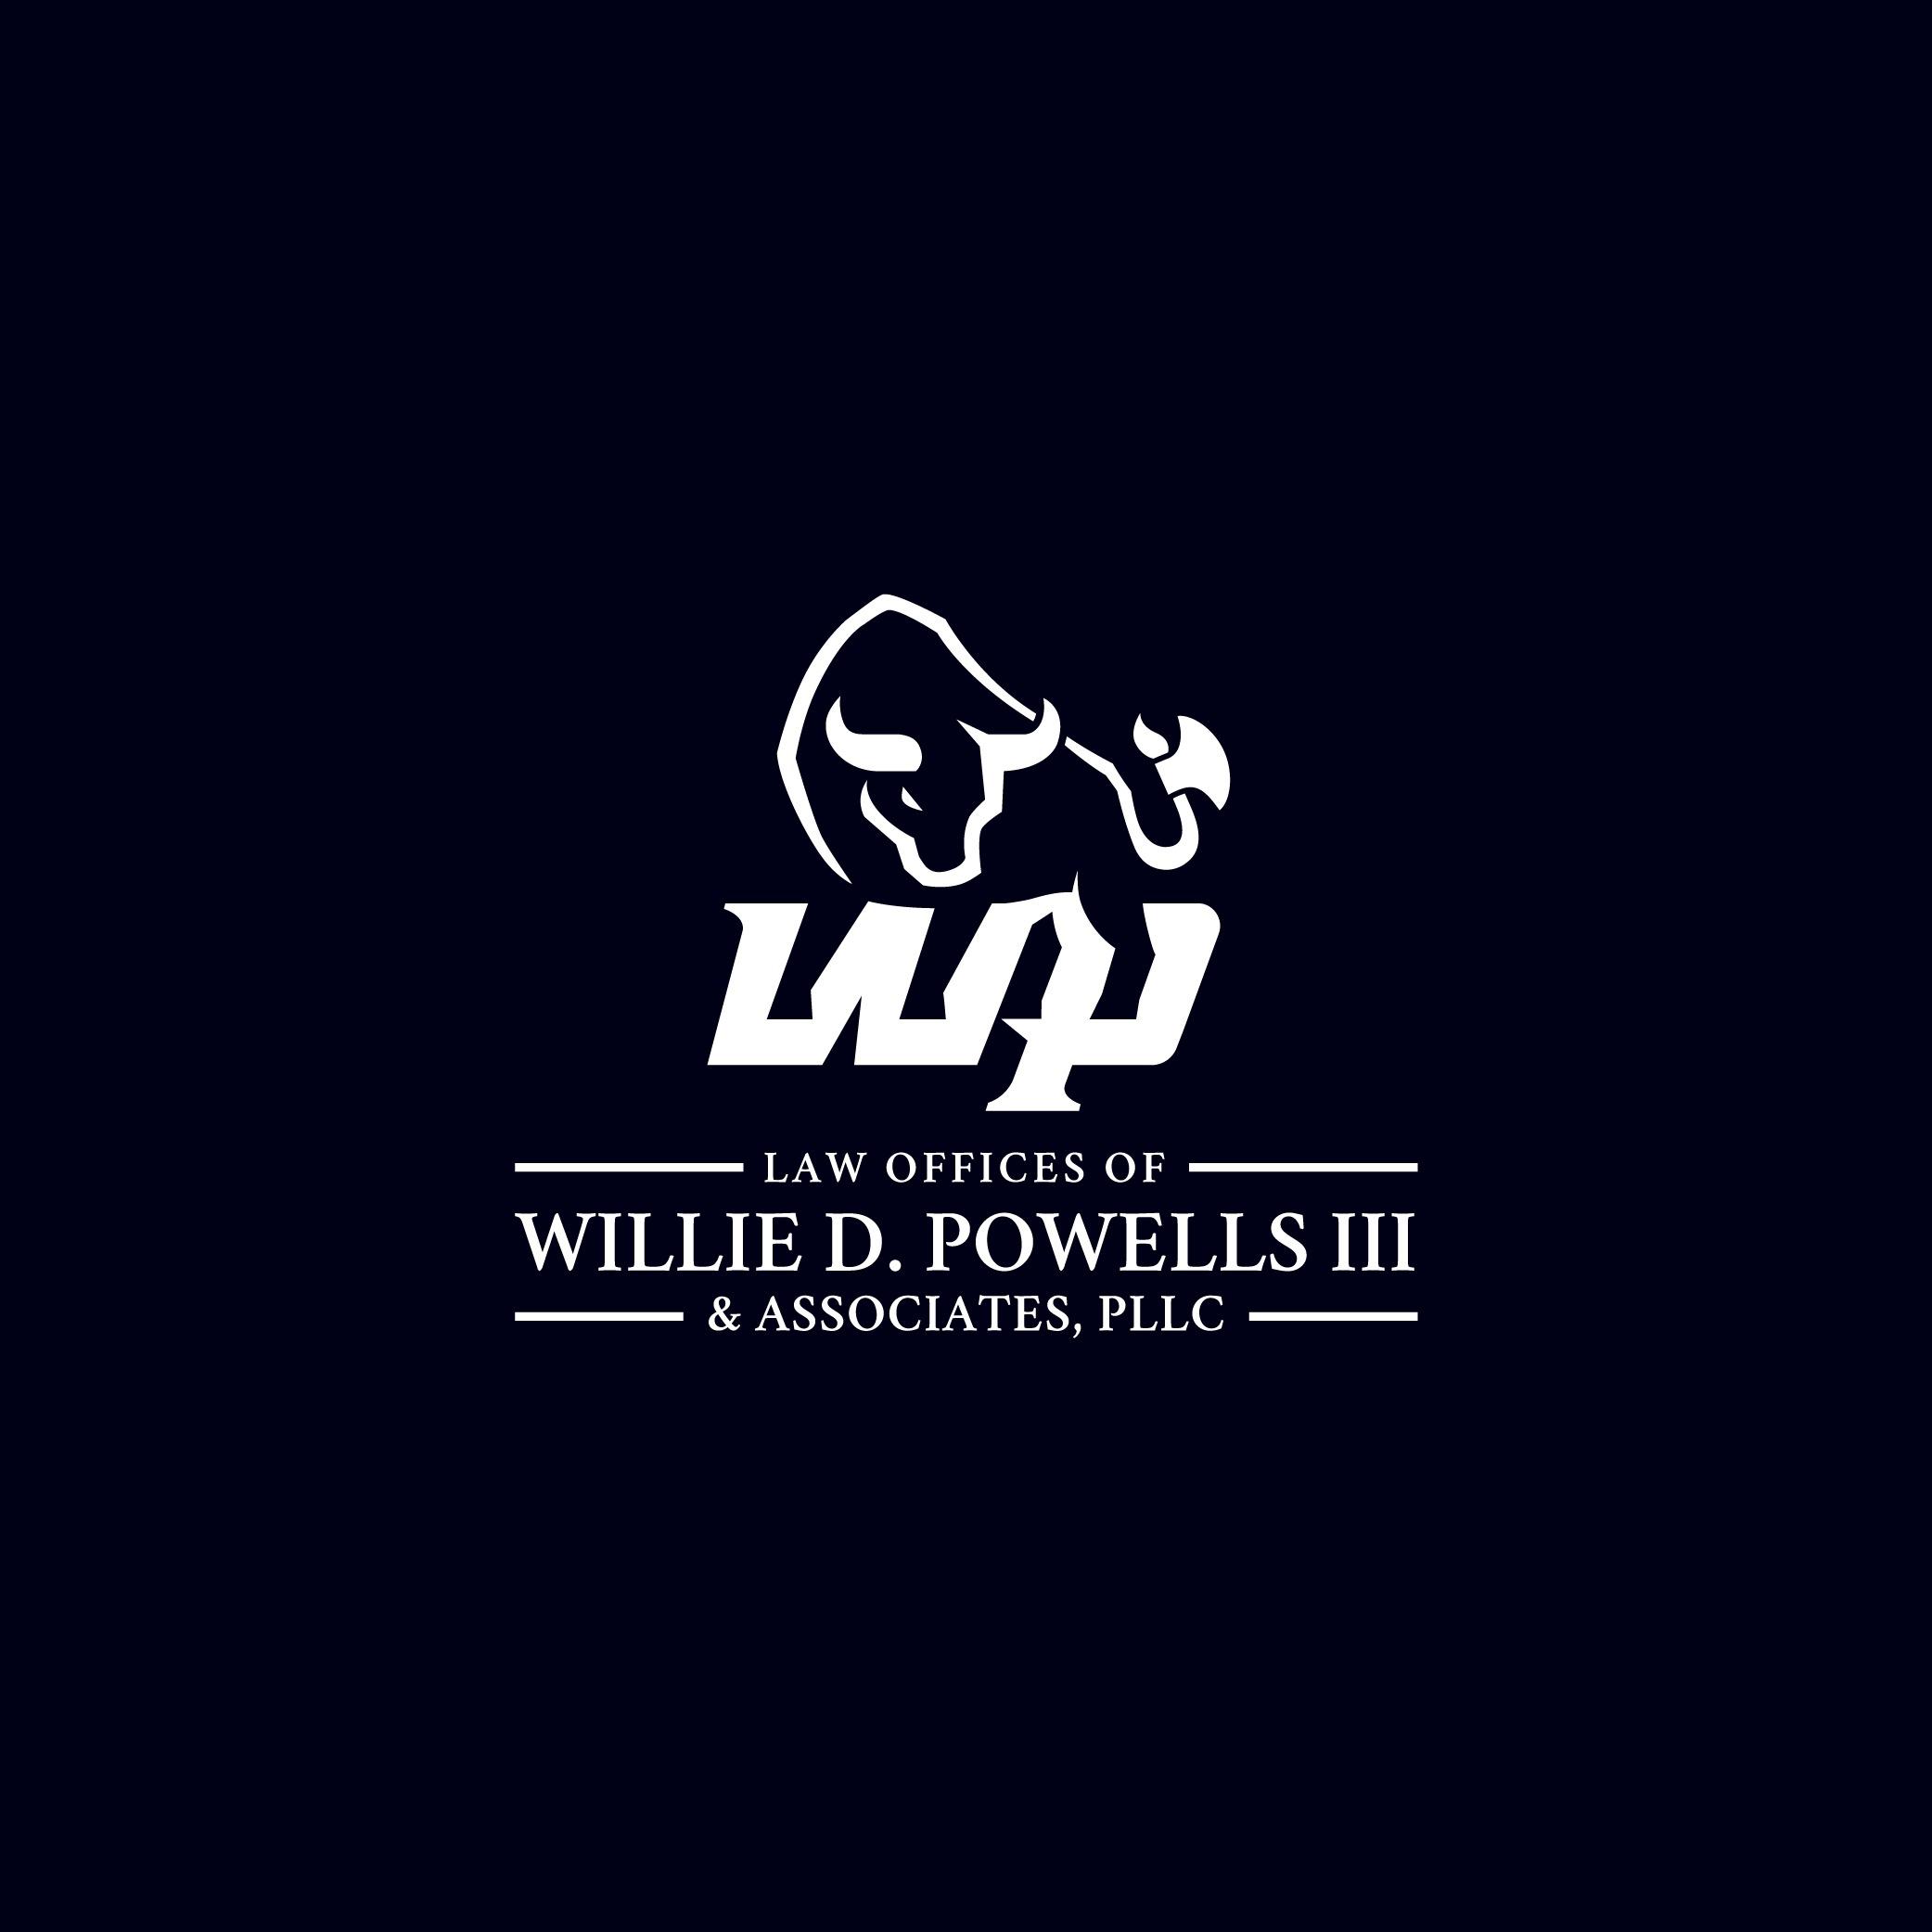 The Law Offices of Willie D. Powells II and Associates, PLLC